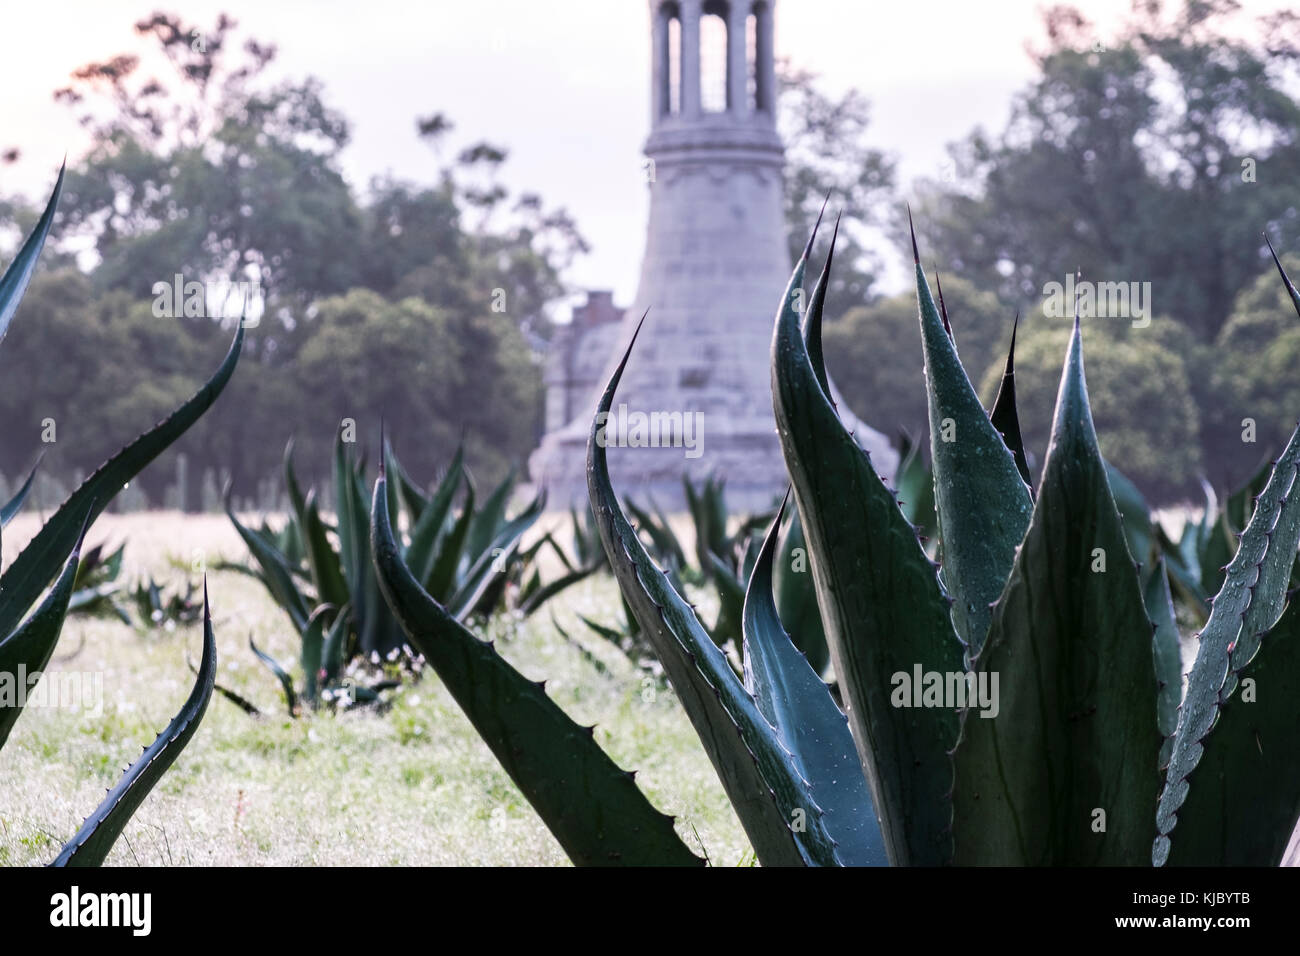 Torres de Chapultepec (Vessels of the 4 Tanks storage of the Carcamo Dolores) Stock Photo